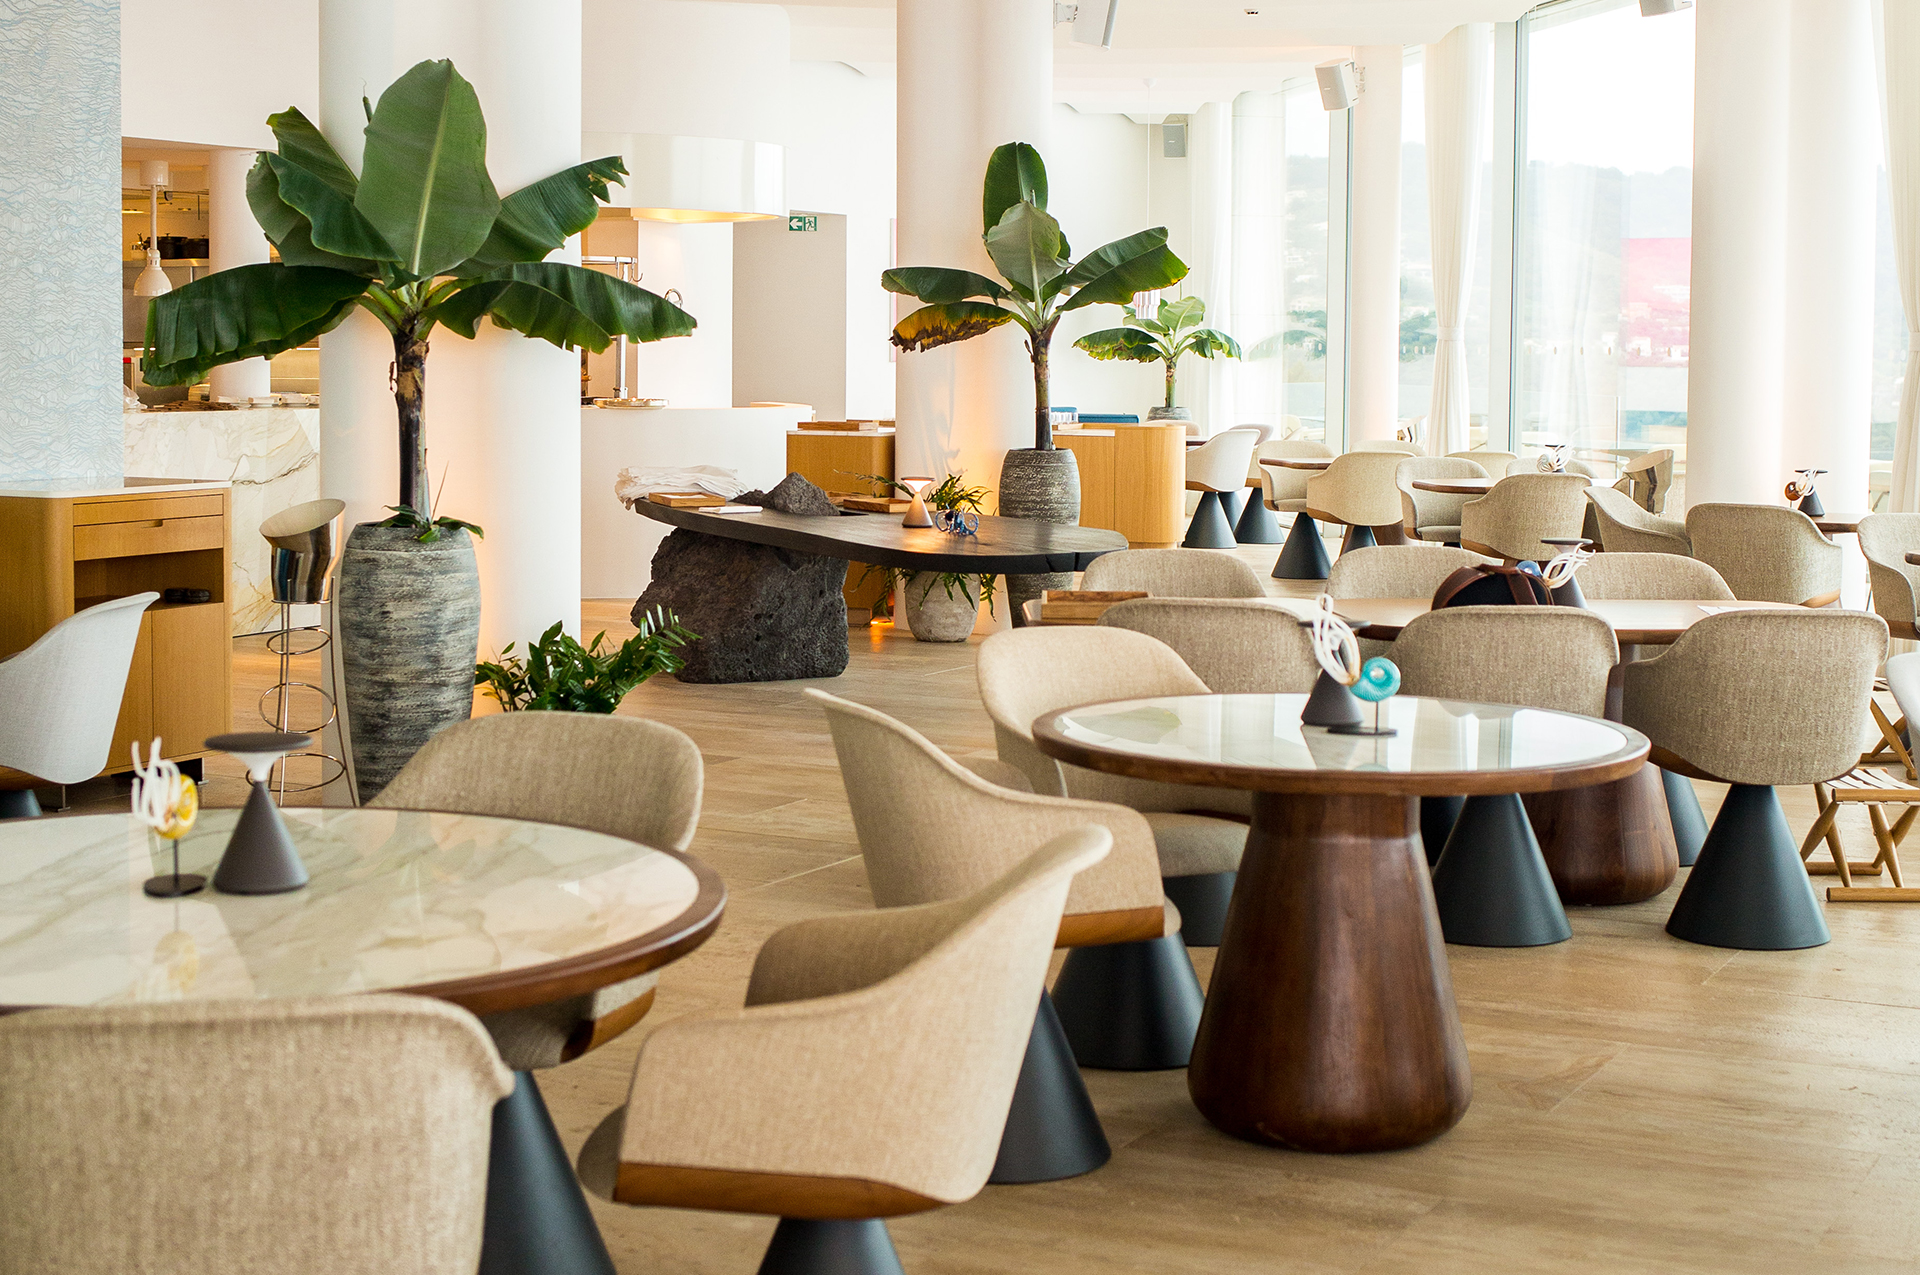 Bar Ceto at The Maybourne Riviera - view of the inside of the bar with table and armchairs and plants.